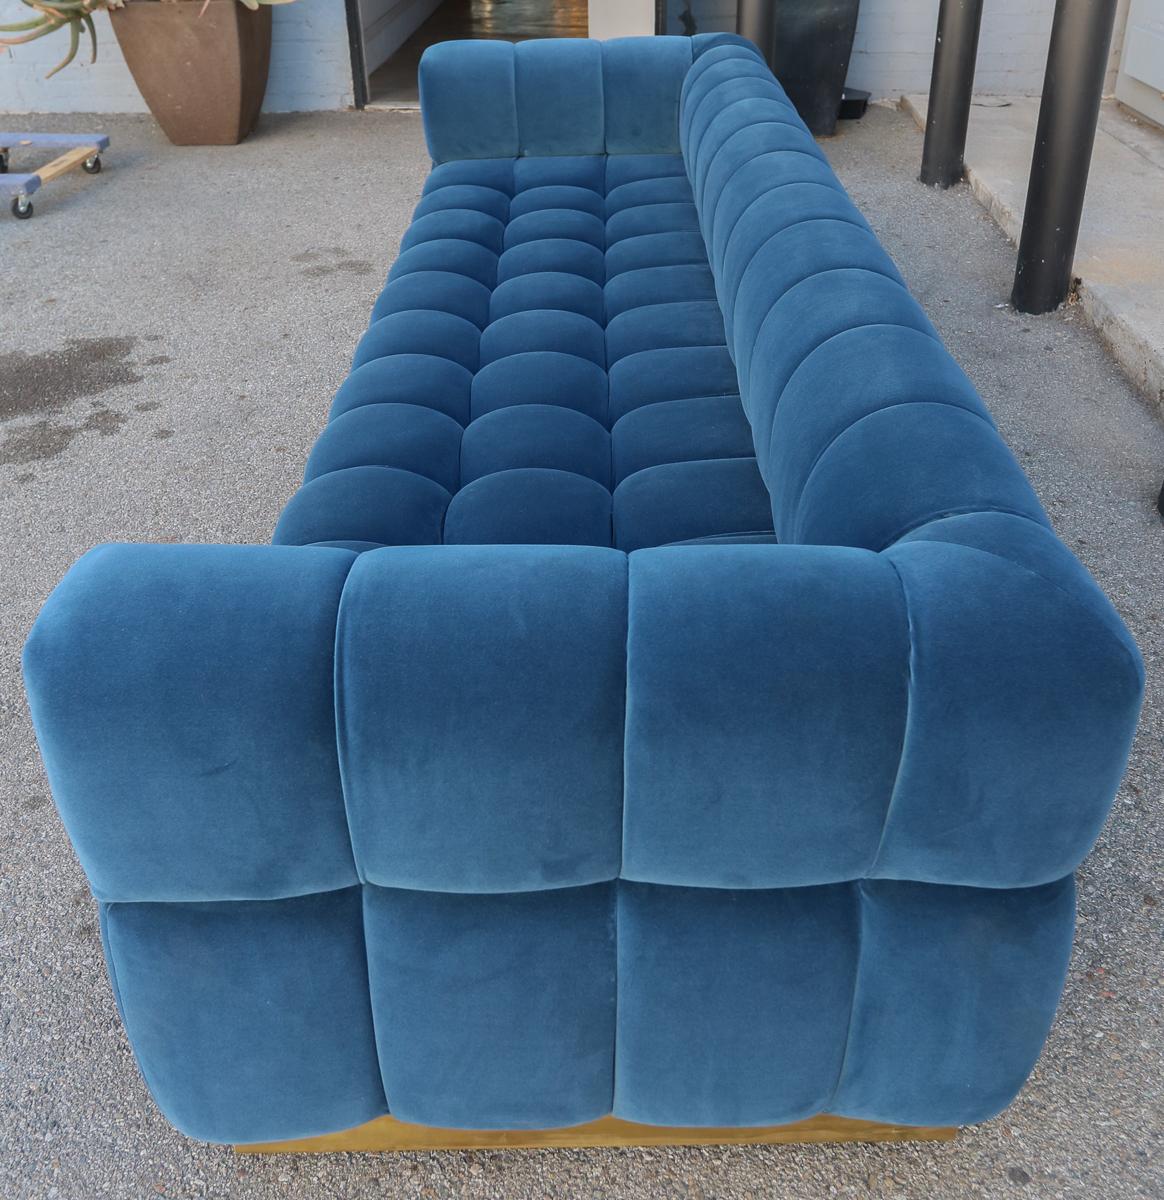 Custom tufted sofa with handmade brass base in blue velvet.  Made in Los Angeles by Adesso Imports. Can be made in different sizes, colors and fabrics or a different metal for the base.